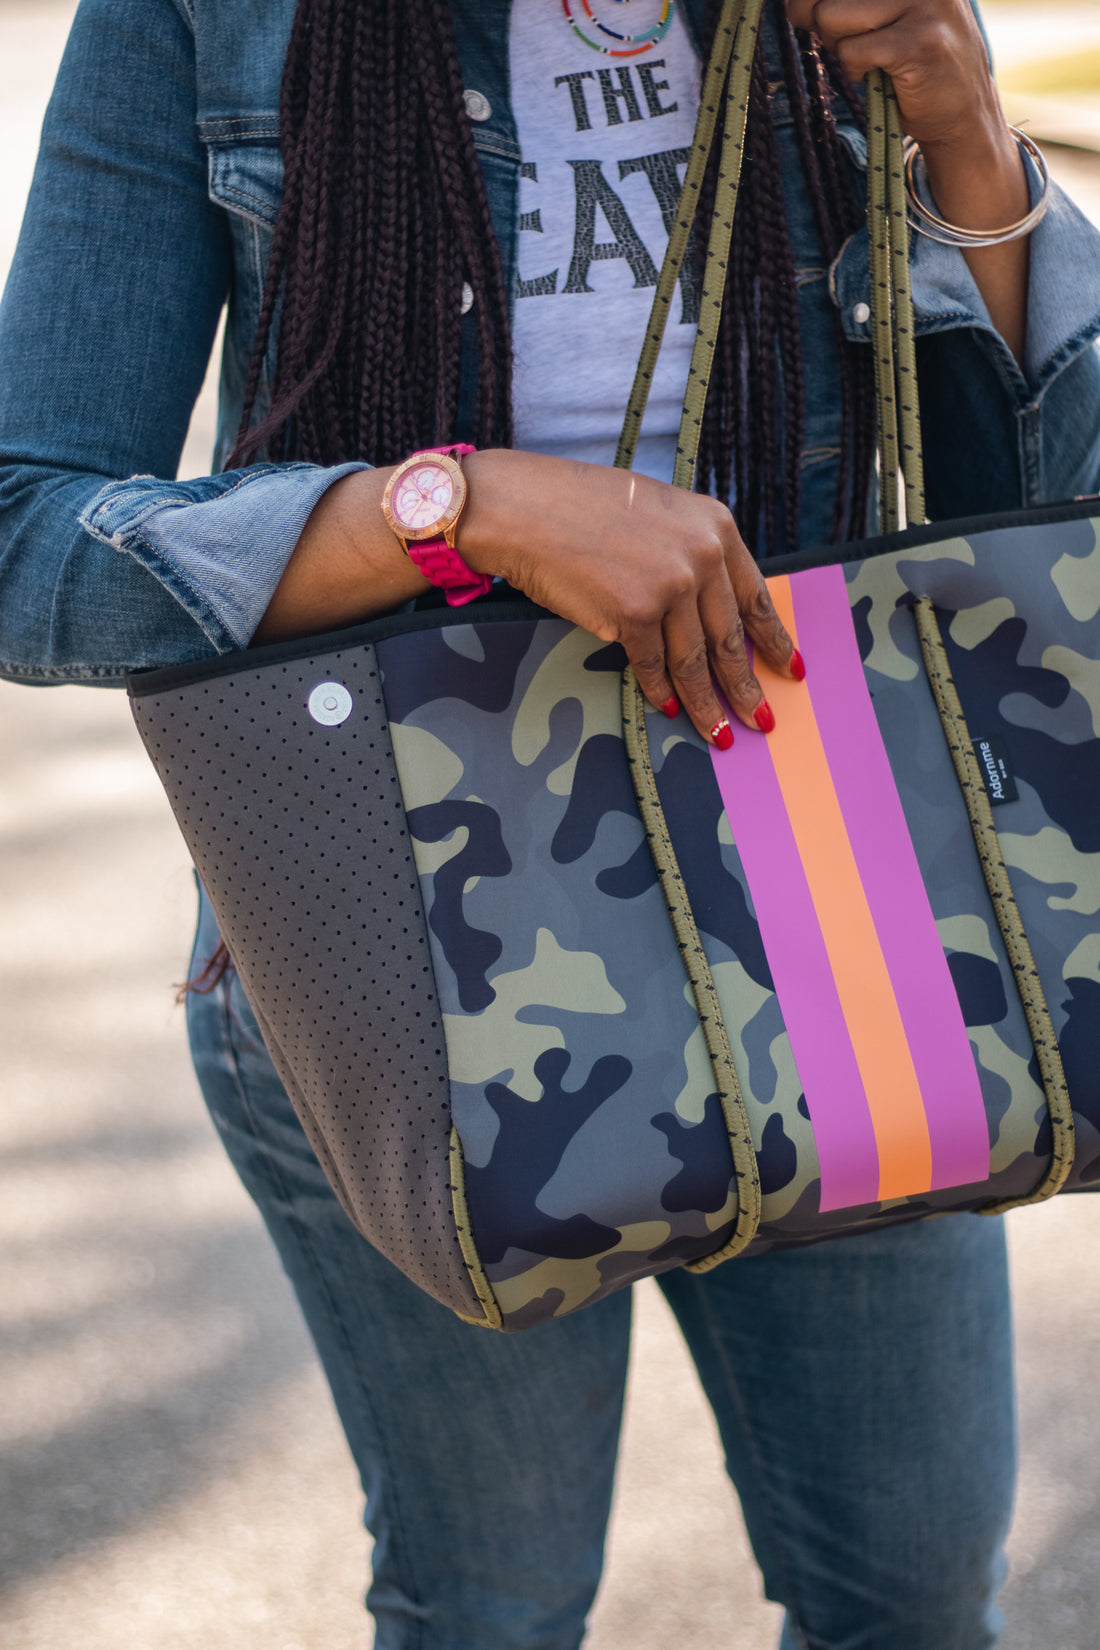 6 REASONS WHY OUR NEOPRENE TOTE BAGS ROCK